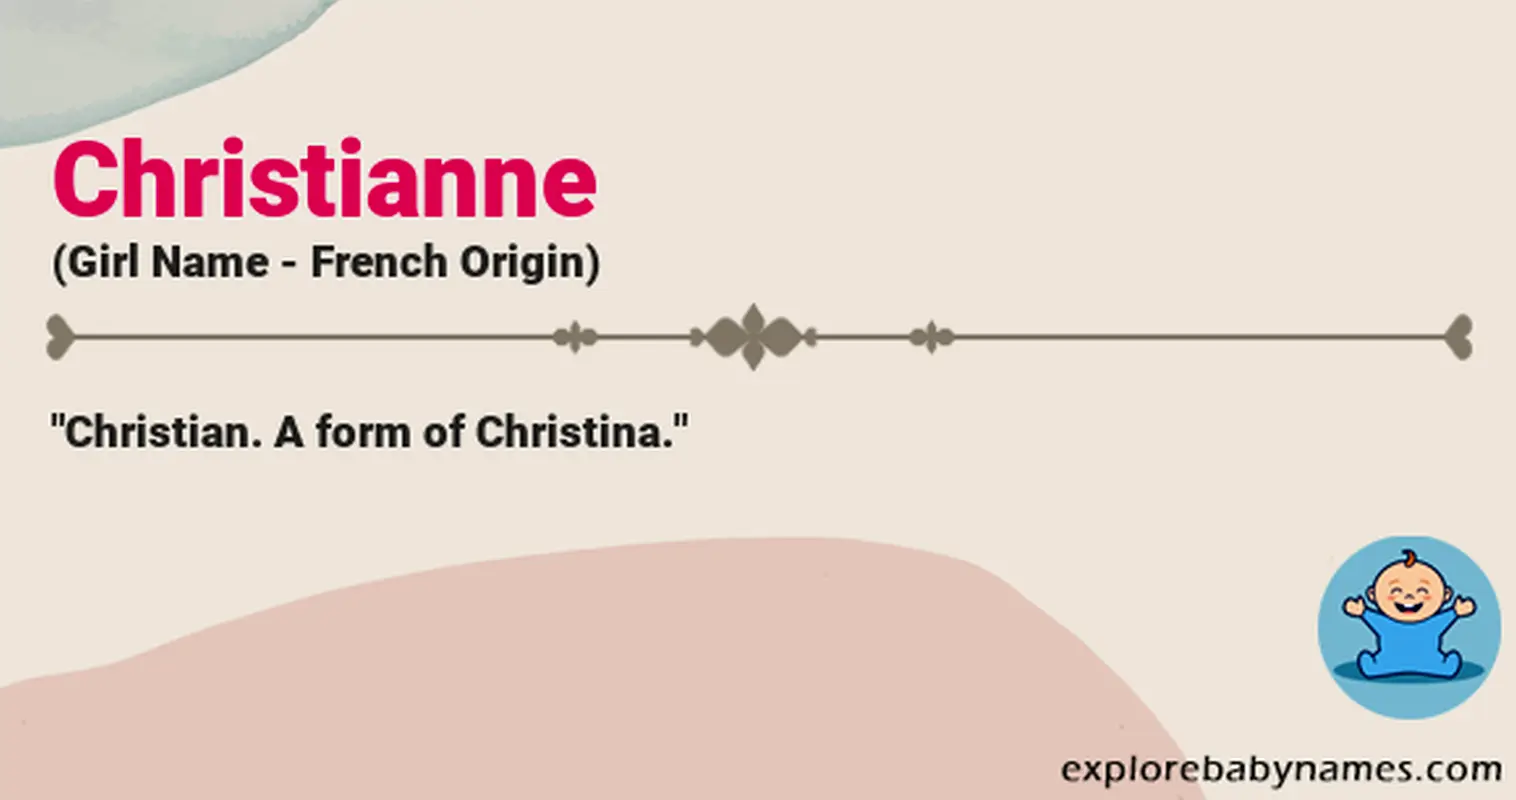 Meaning of Christianne